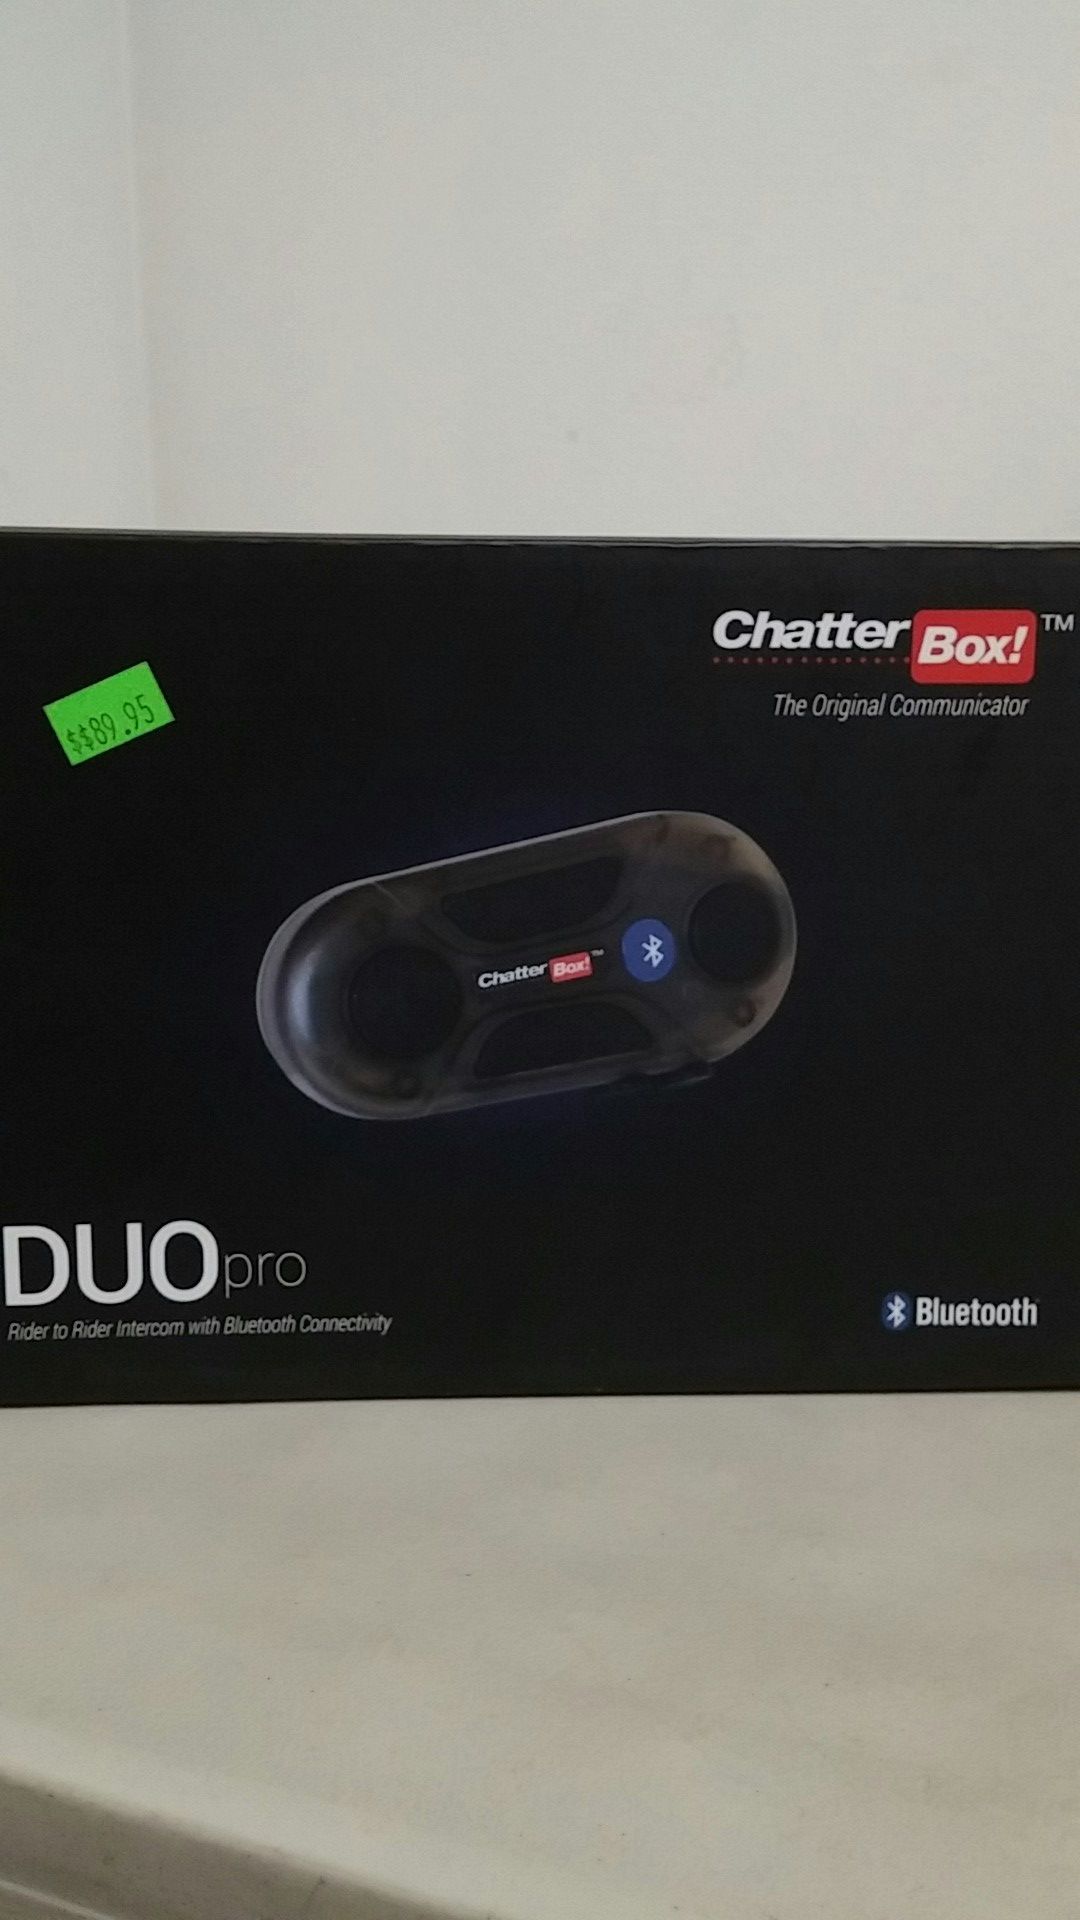 ChatterBox DUOpro